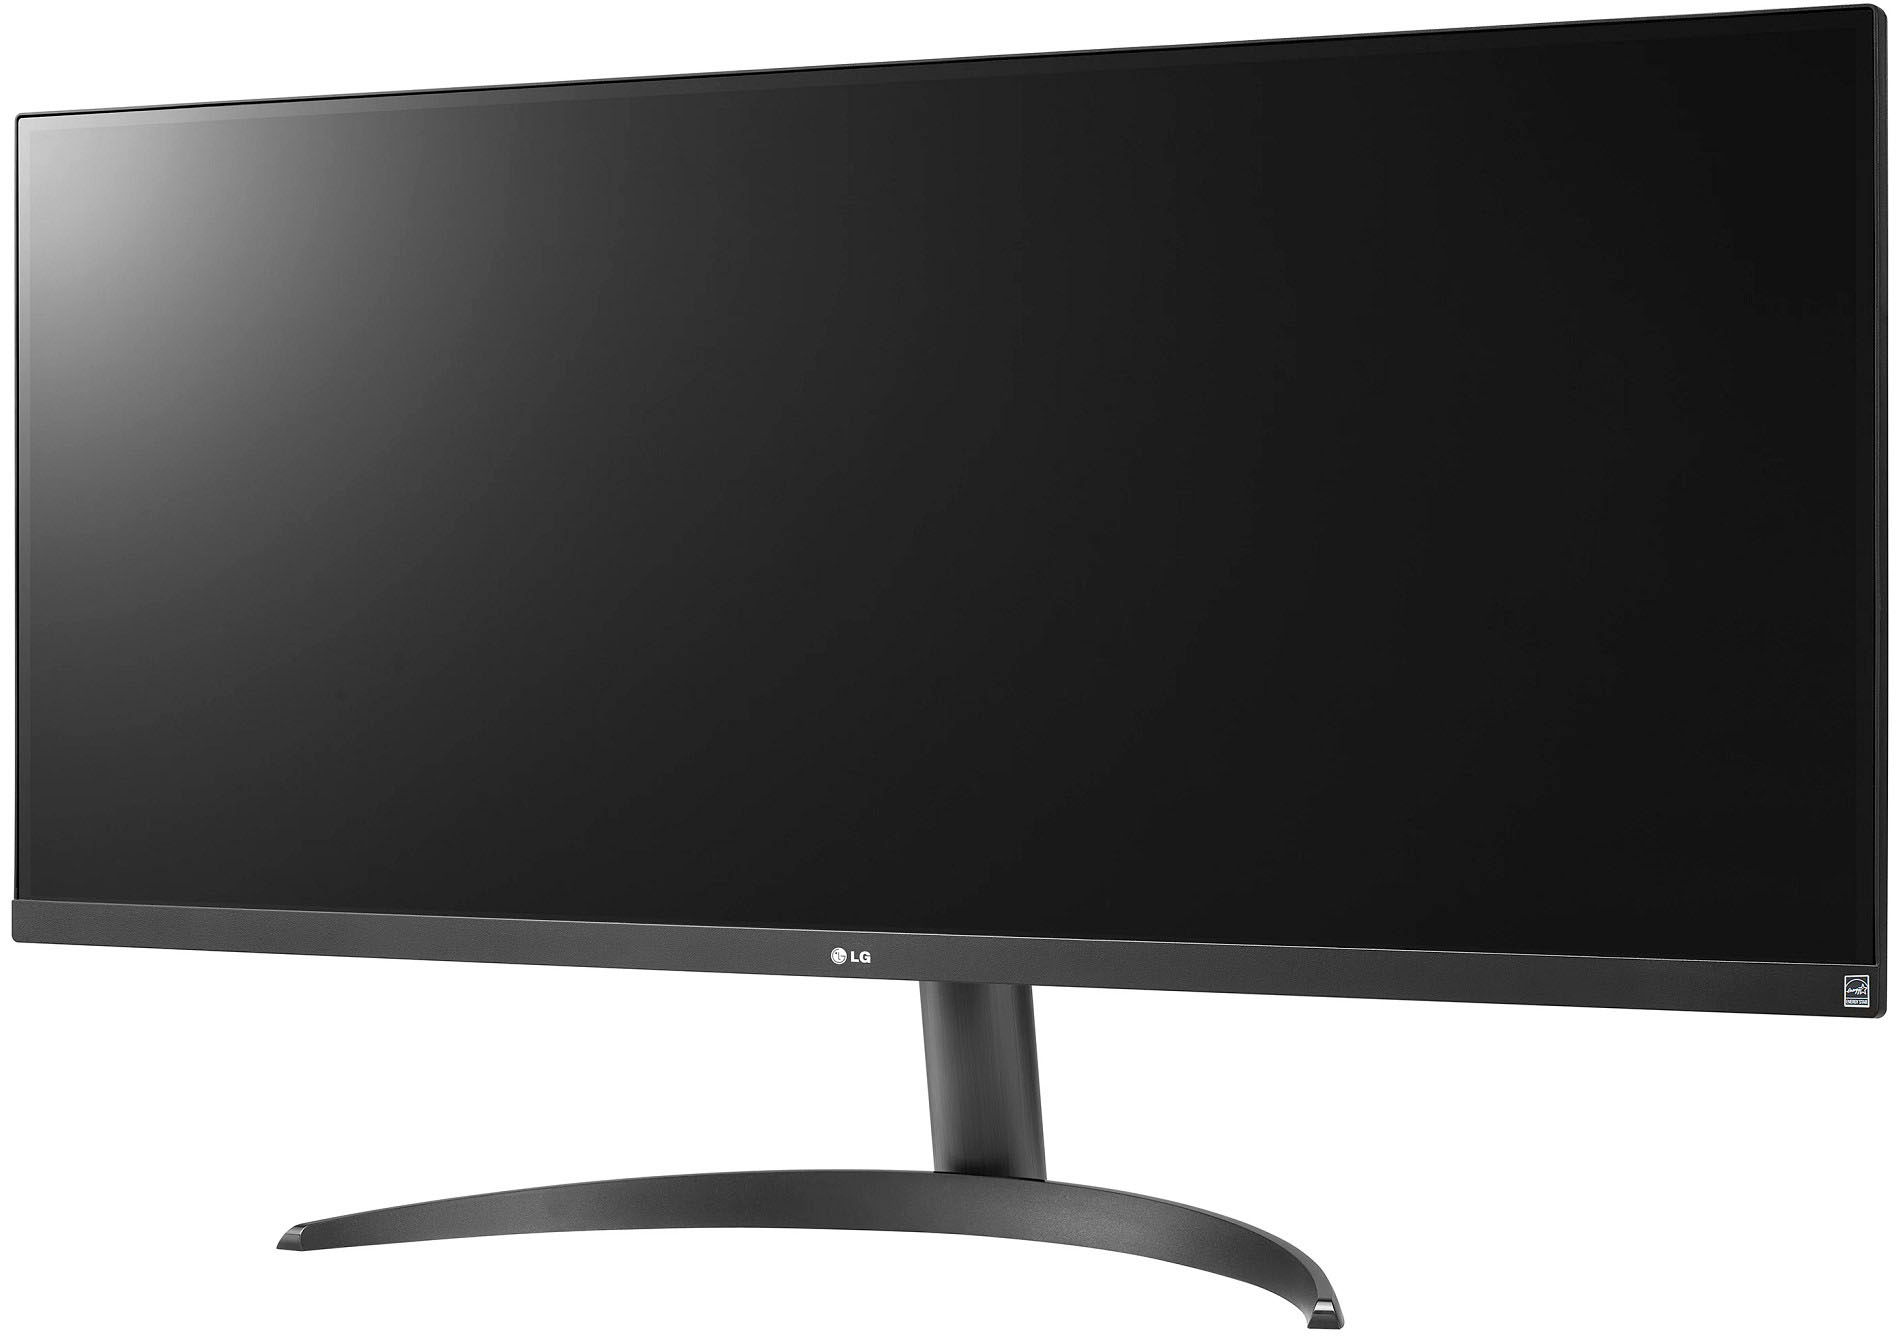 Left View: LG - 34" IPS LED UltraWide FHD 100Hz AMD FreeSync Monitor with HDR (HDMI, DisplayPort) - Black